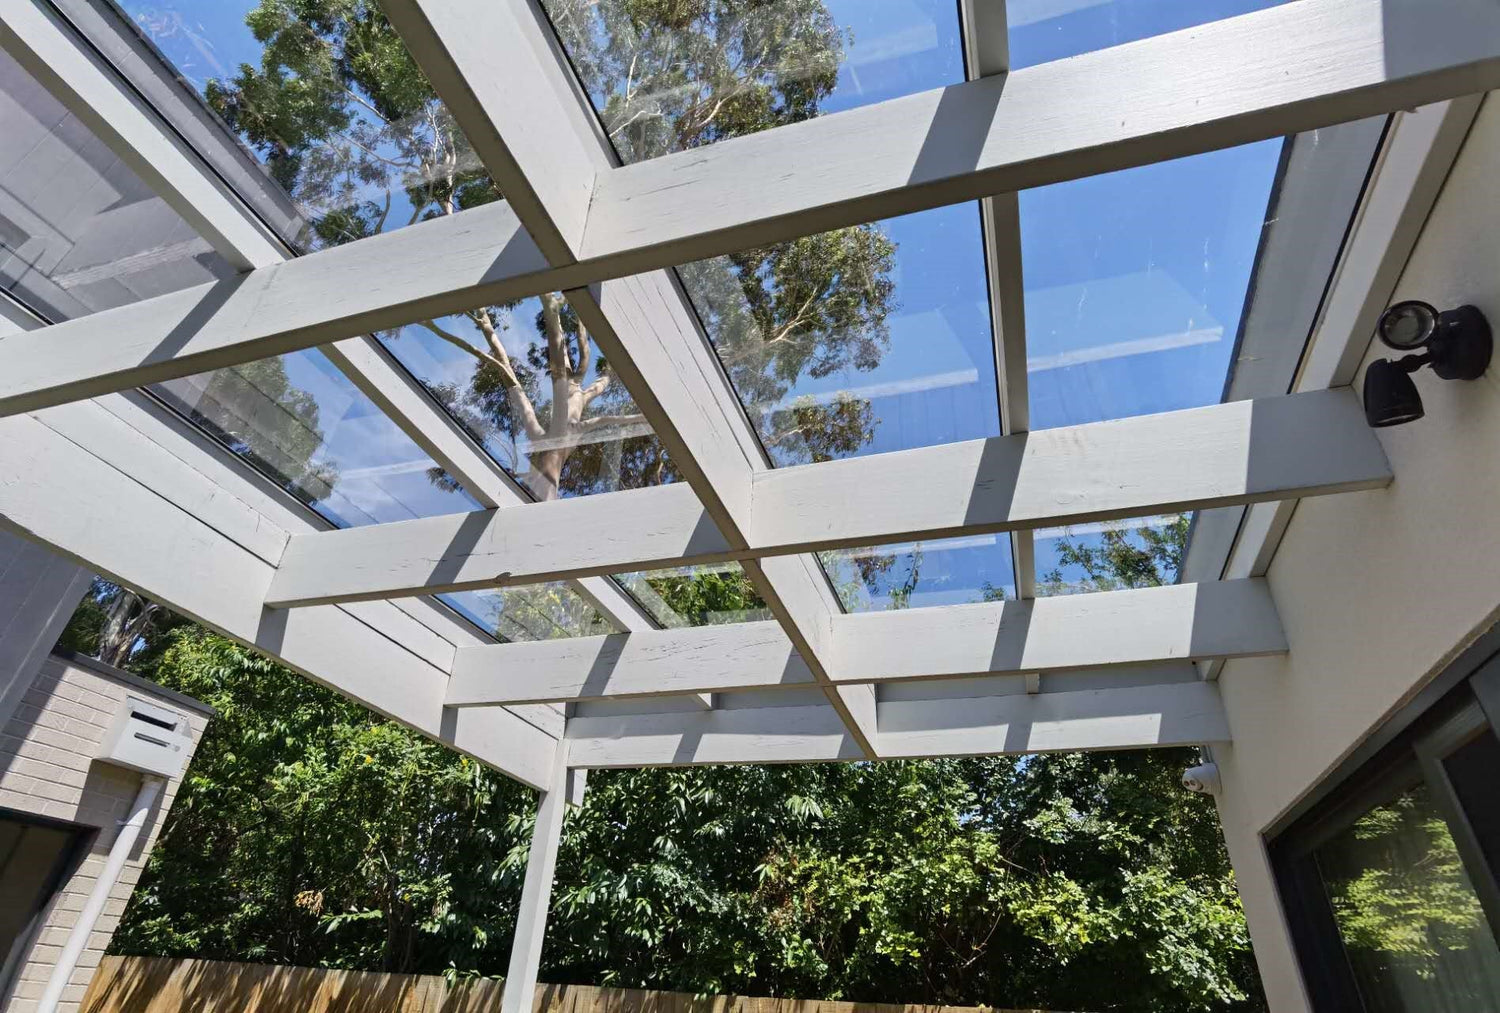 Why Polycarbonate Roofing Is One Of The Best Alternatives For Glass Roof Pergola? - ExcelitePlas